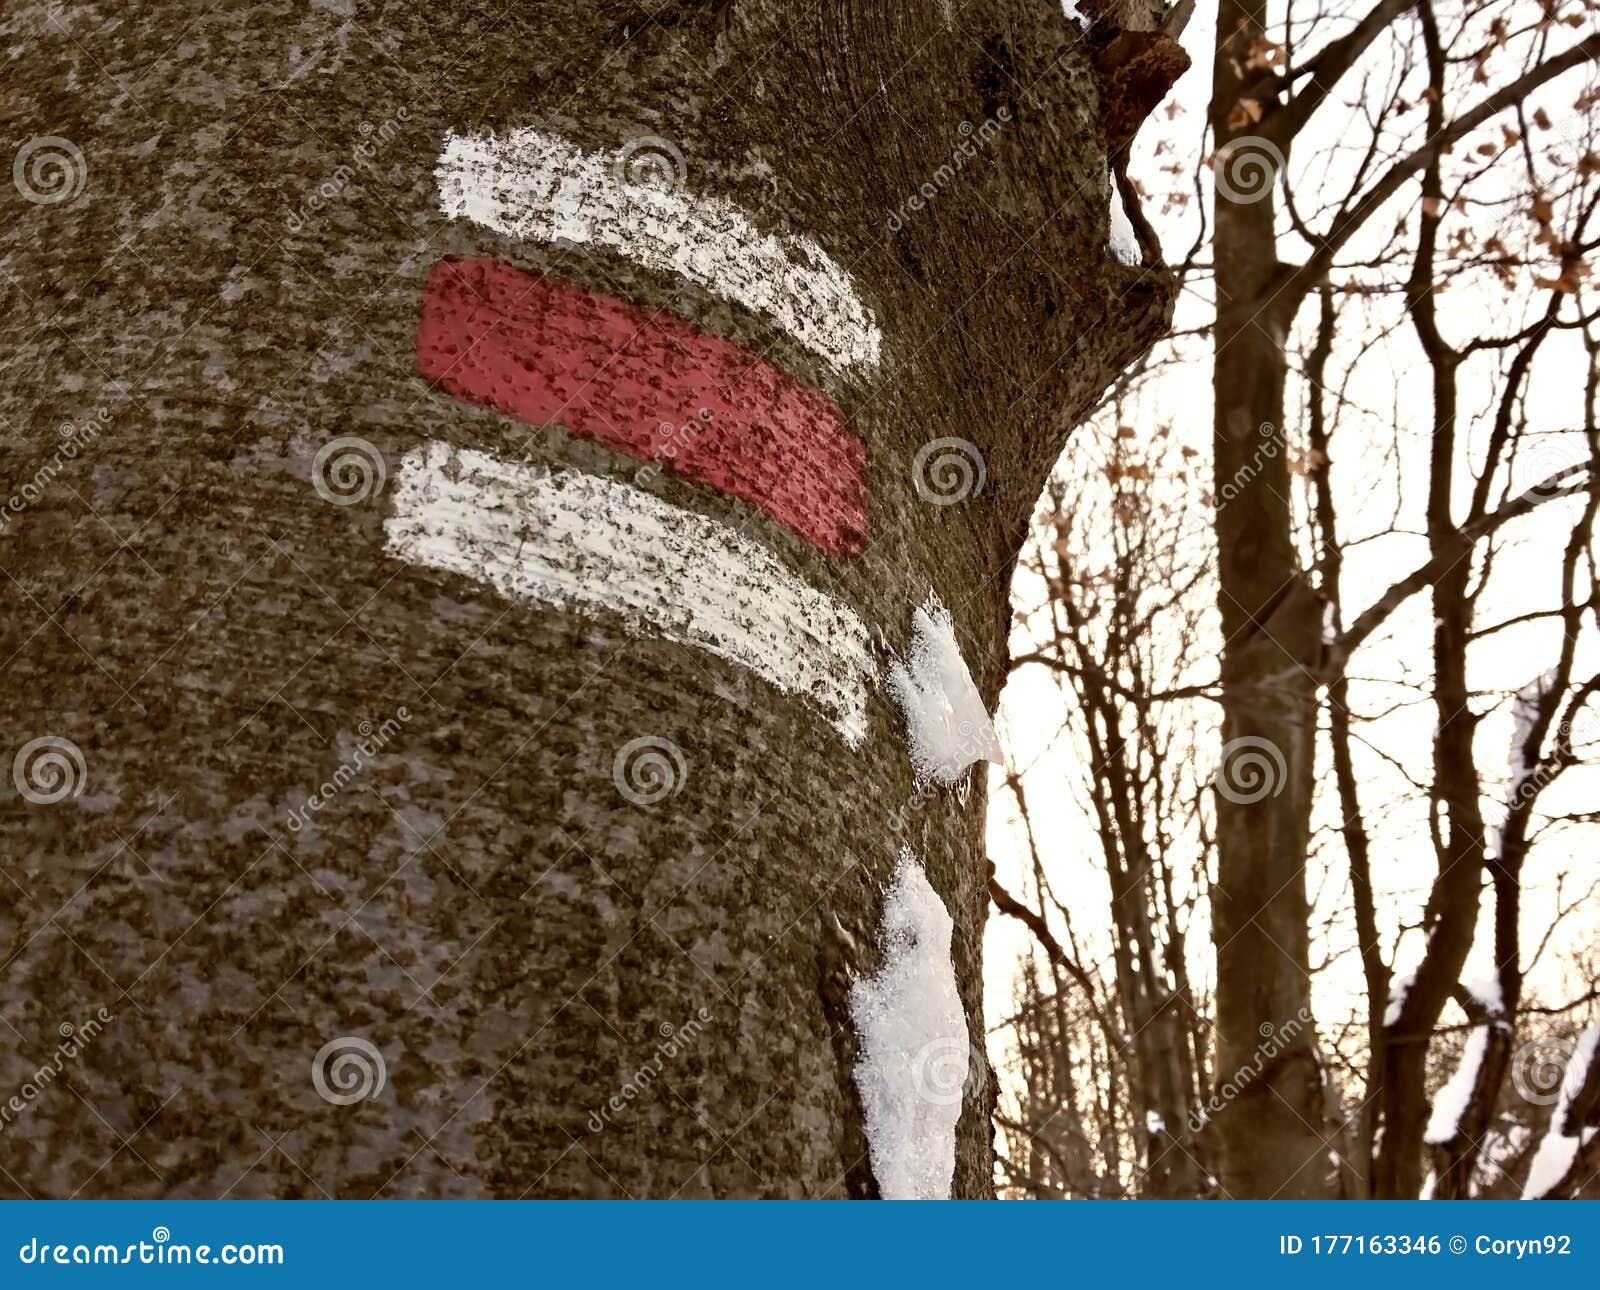 red touristic mark on tree trunk rugger bark in snowy winter deciduous wood. detail of touristic path sign